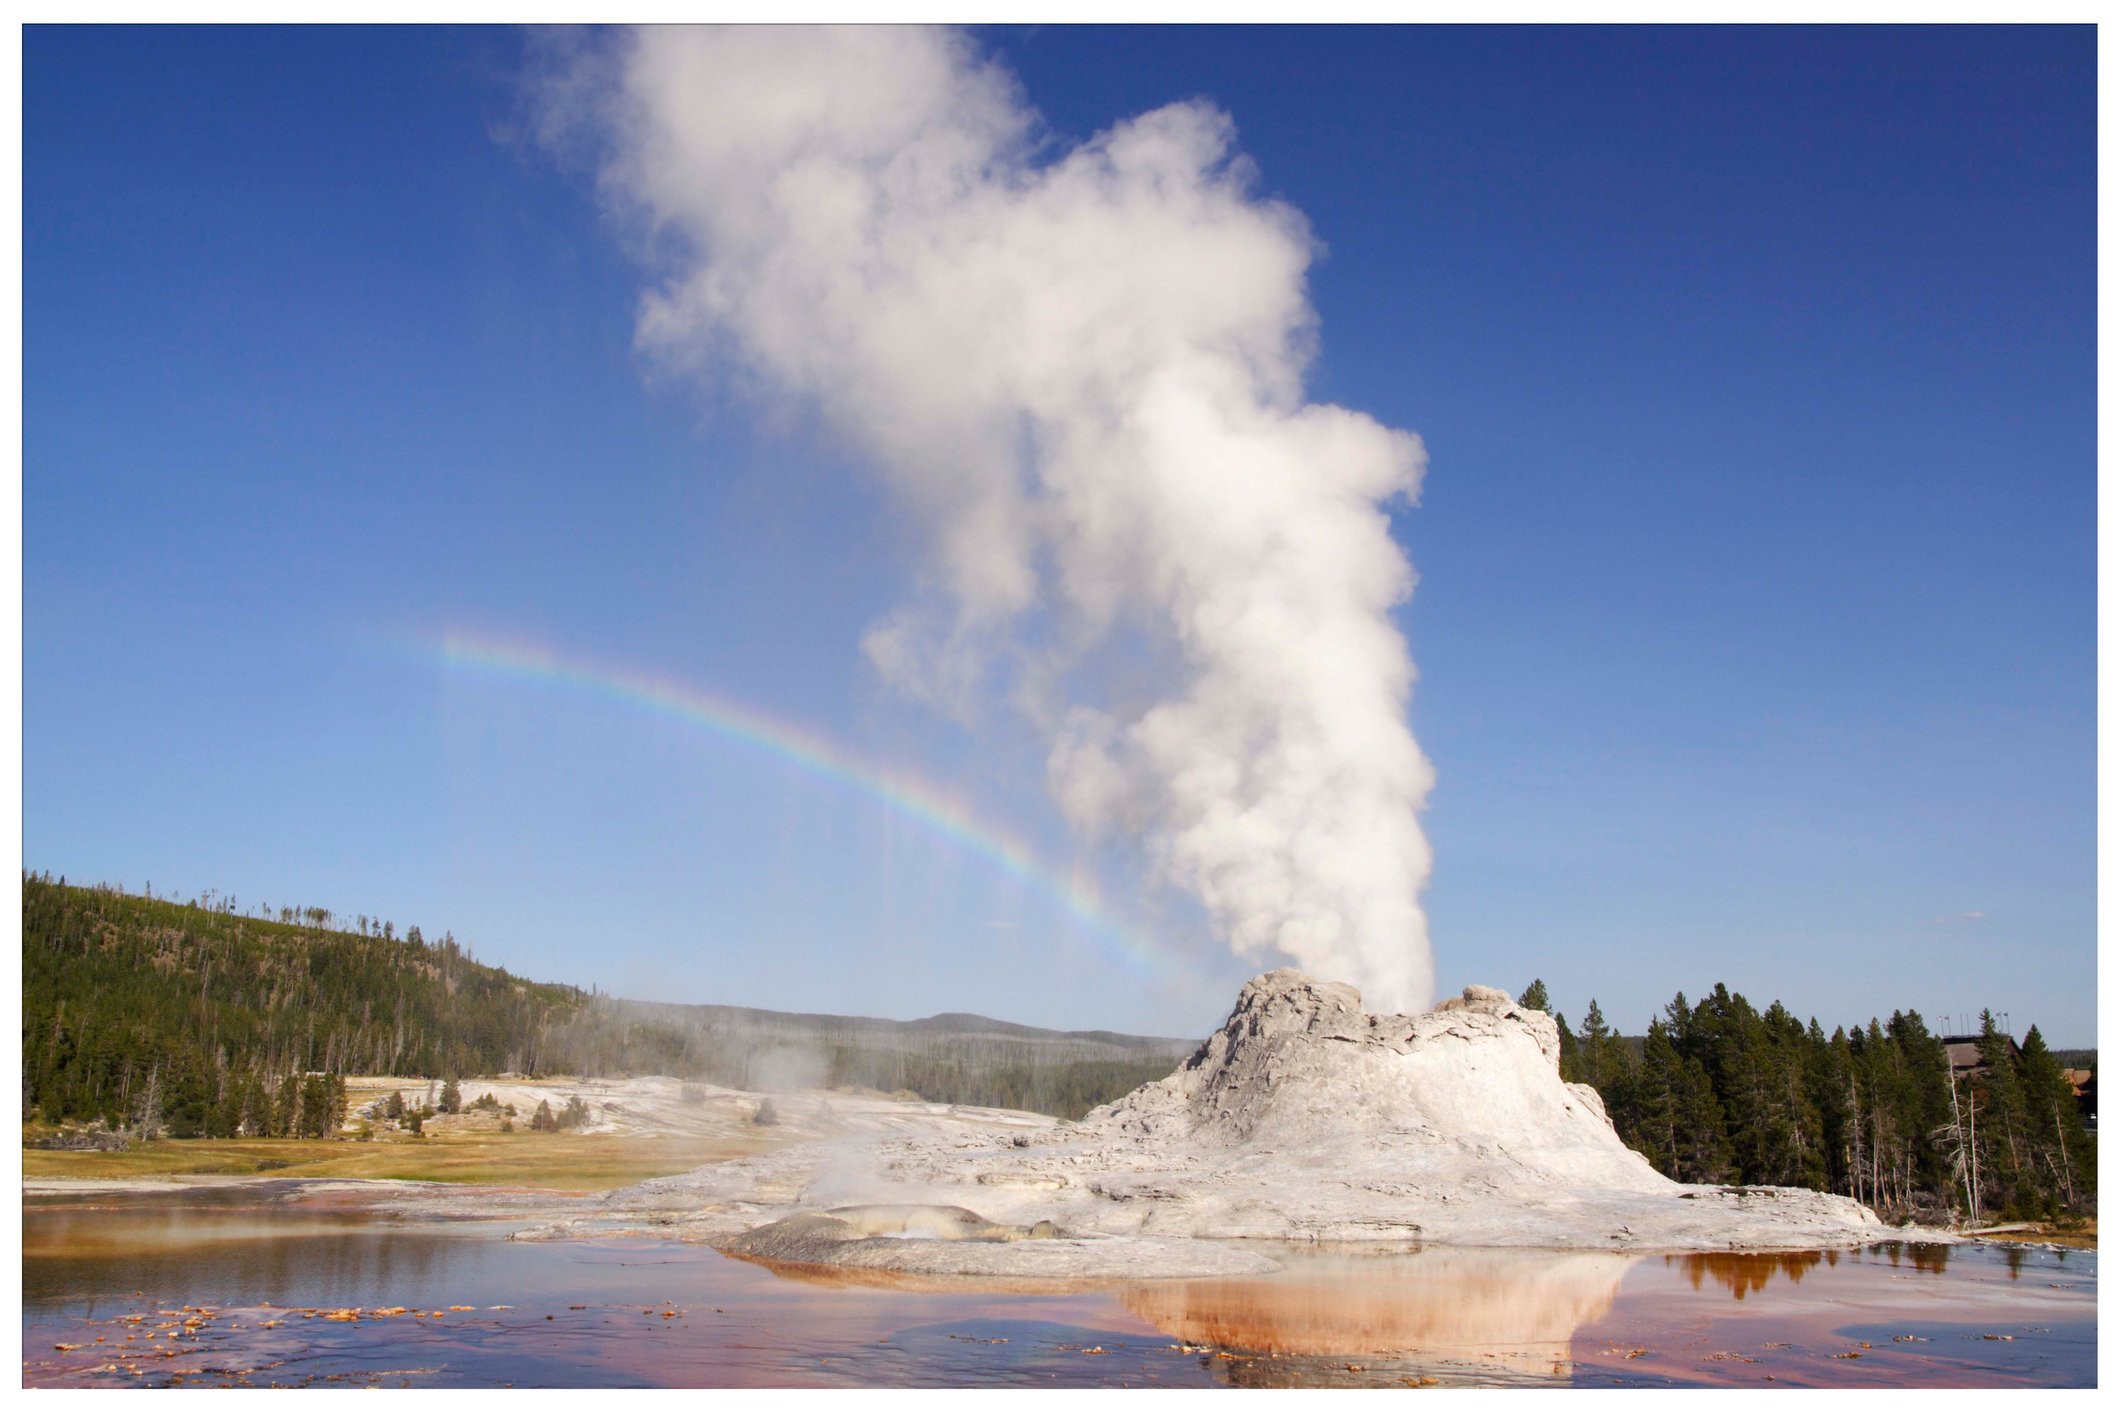 15 Interesting Yellowstone National Park Facts You Didn't Know